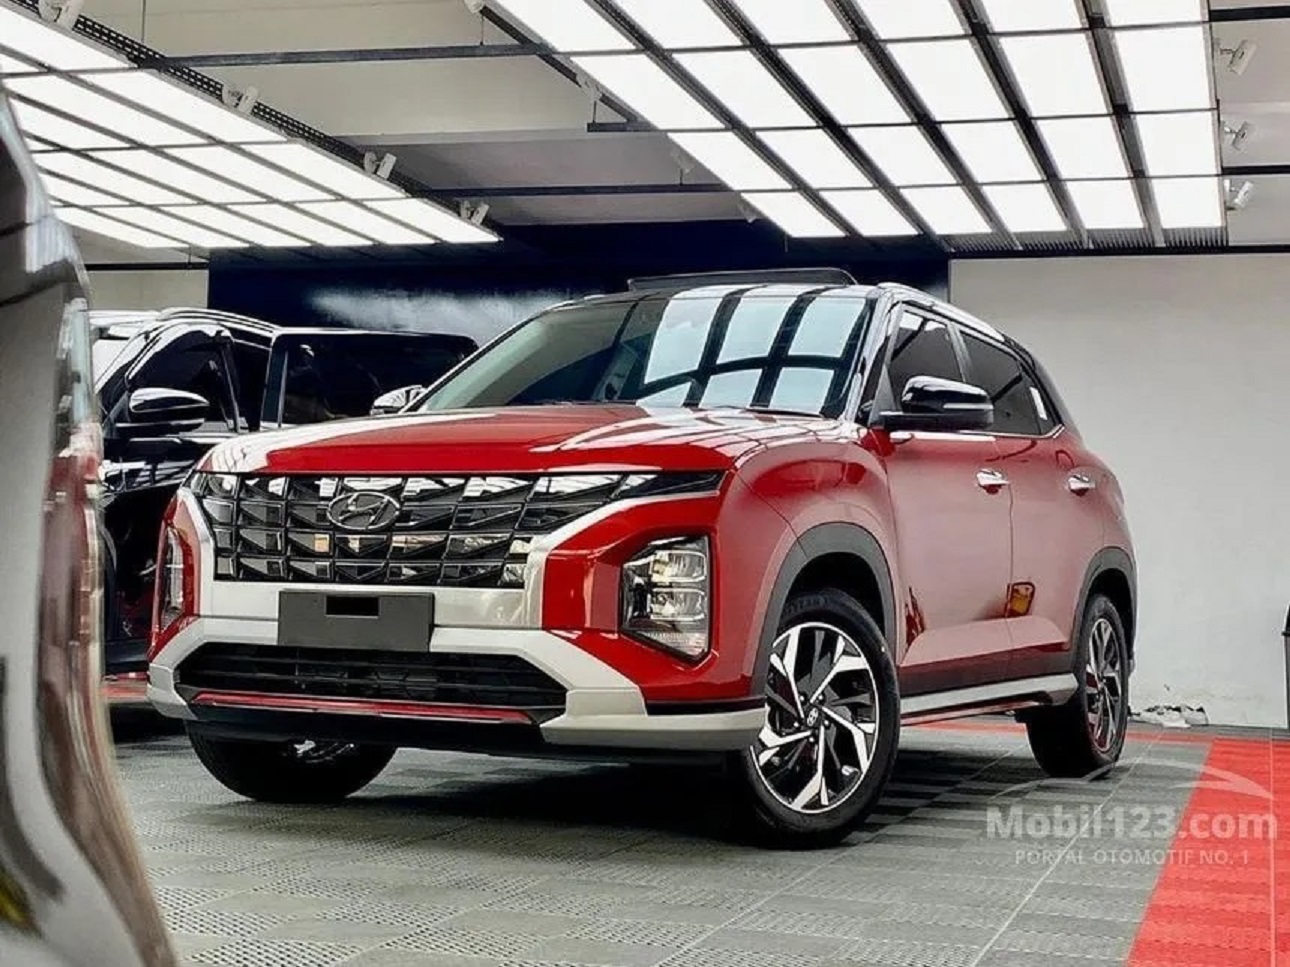 The new generation Hyundai Creta is about to launch, sharing the same equipment and design with the Hyundai Accent 2023